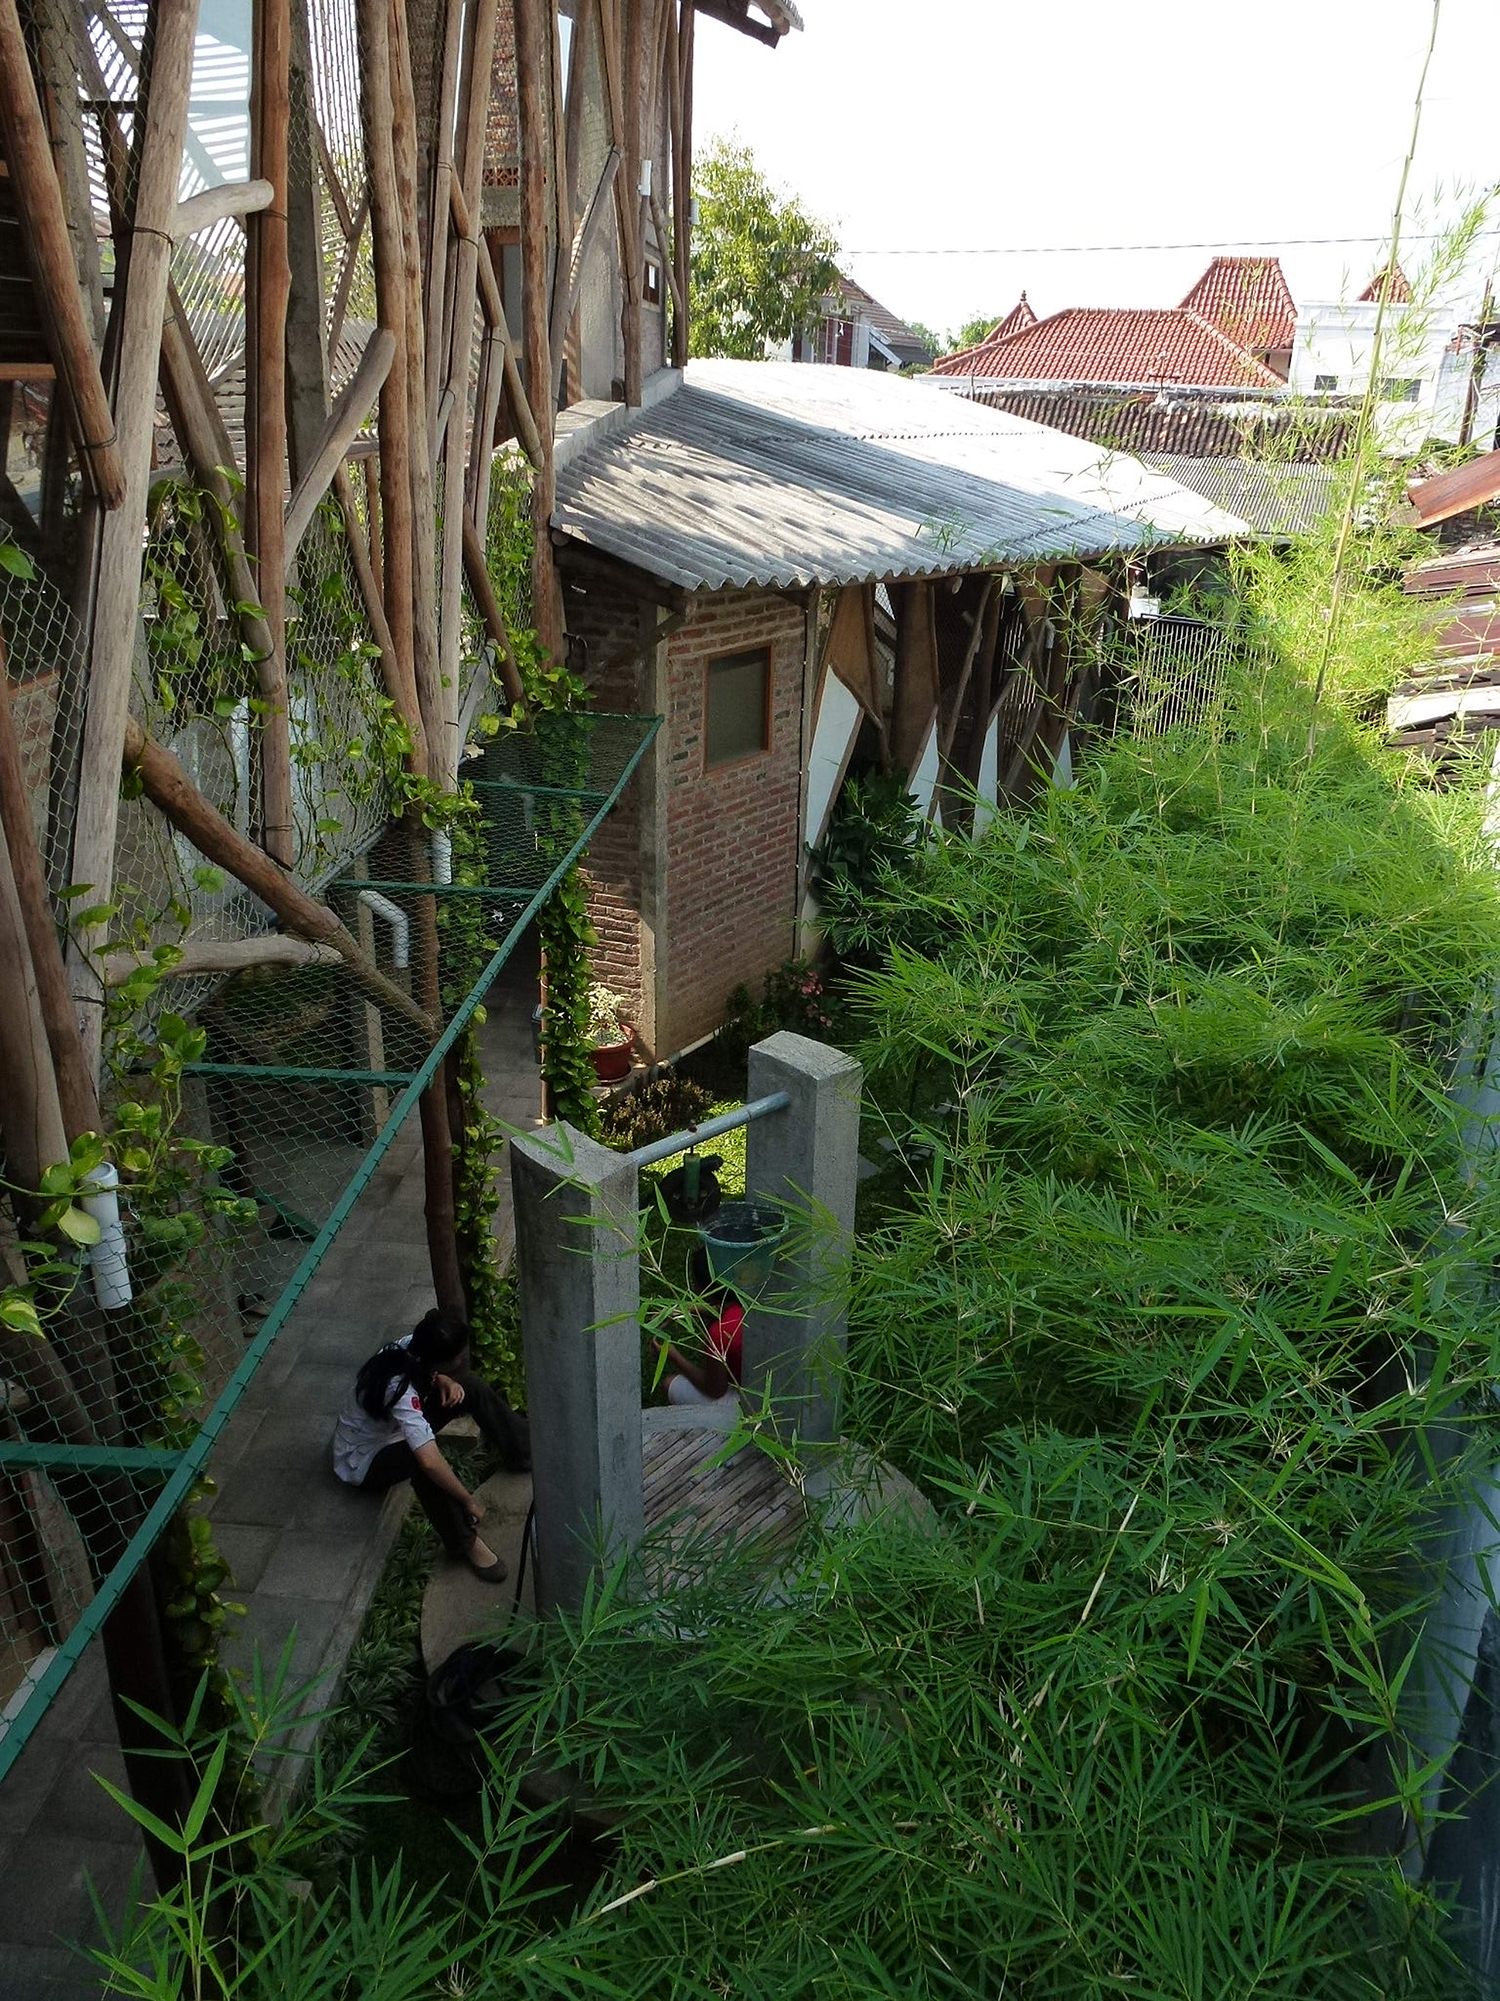 The bamboo garden besides the house keeps the ground water and prevents the well from drying up. All the spaces in this house interacts directly with the side